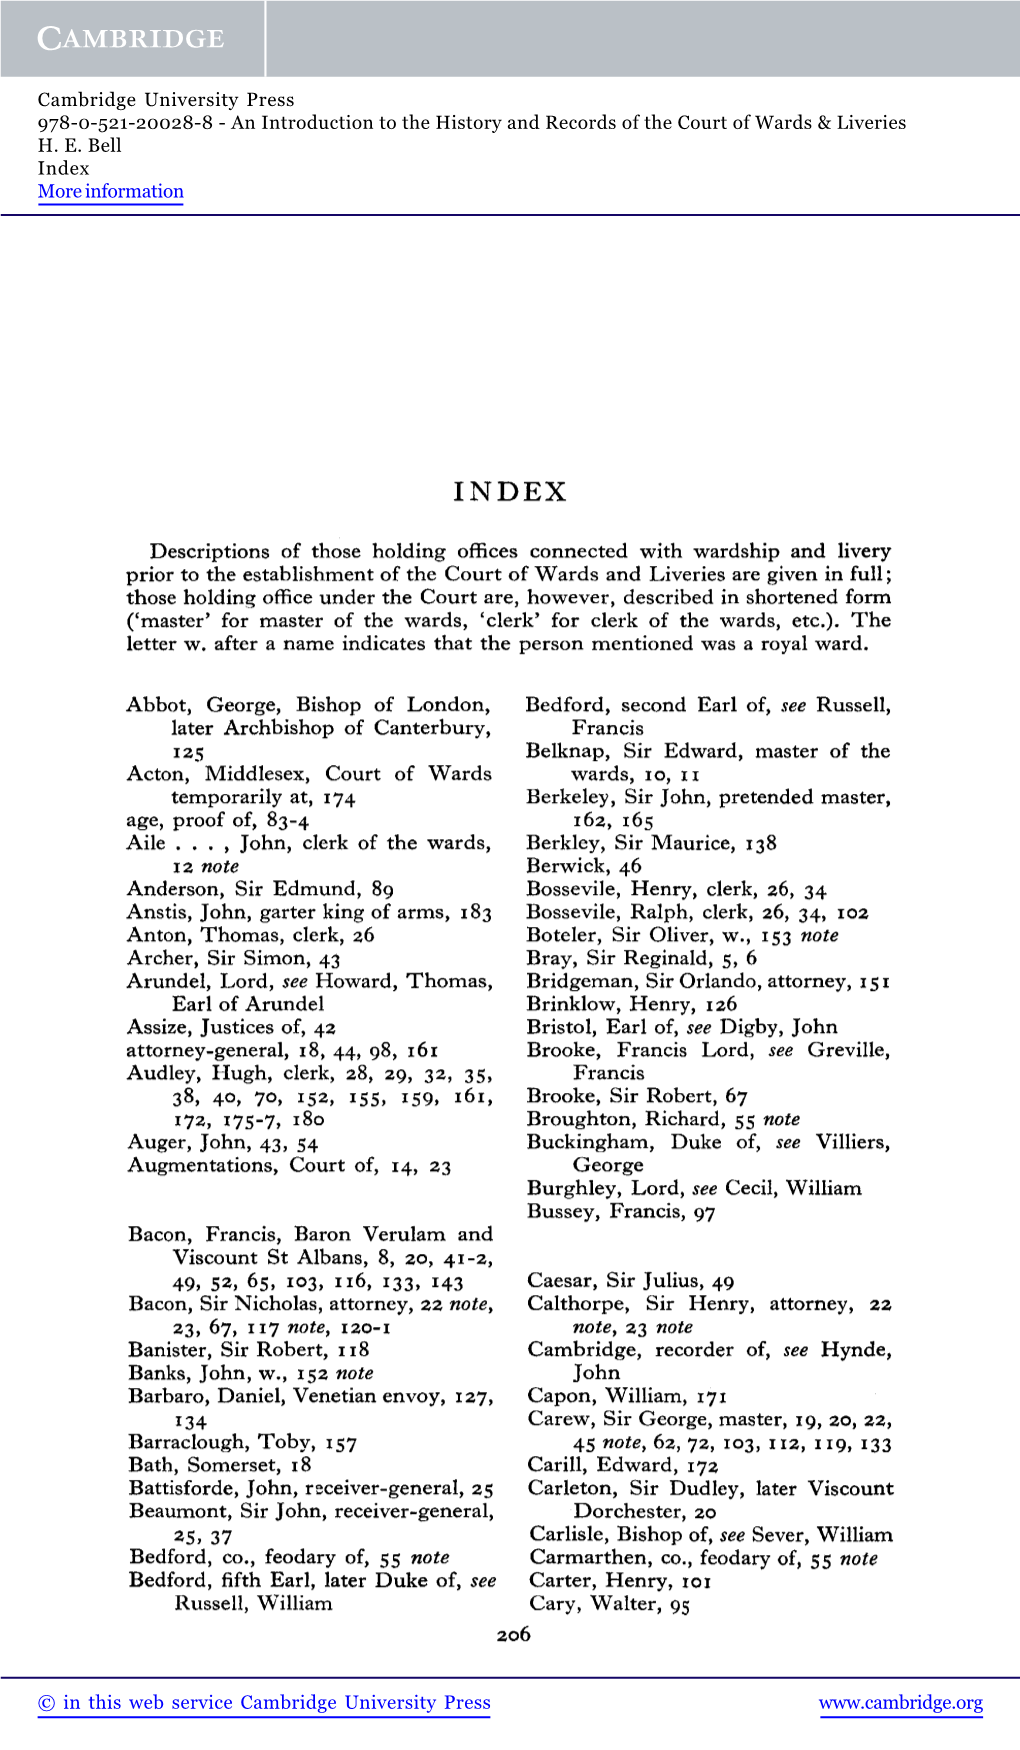 Descriptions of Those Holding Offices Connected with Wardship and Livery